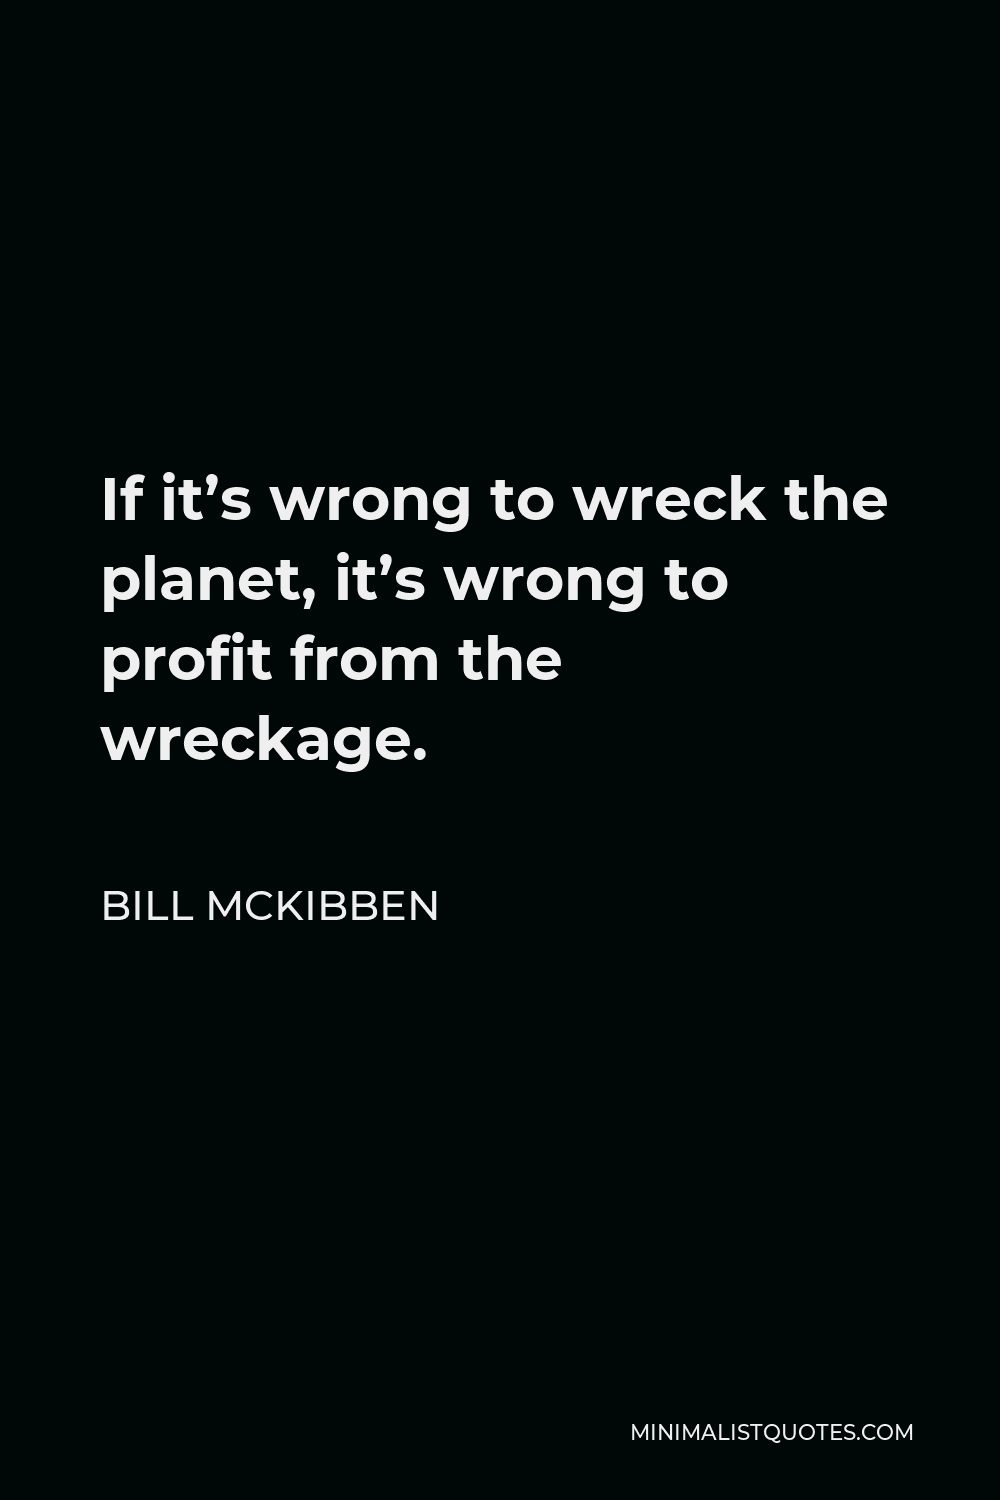 Bill McKibben Quote - If it’s wrong to wreck the planet, it’s wrong to profit from the wreckage.